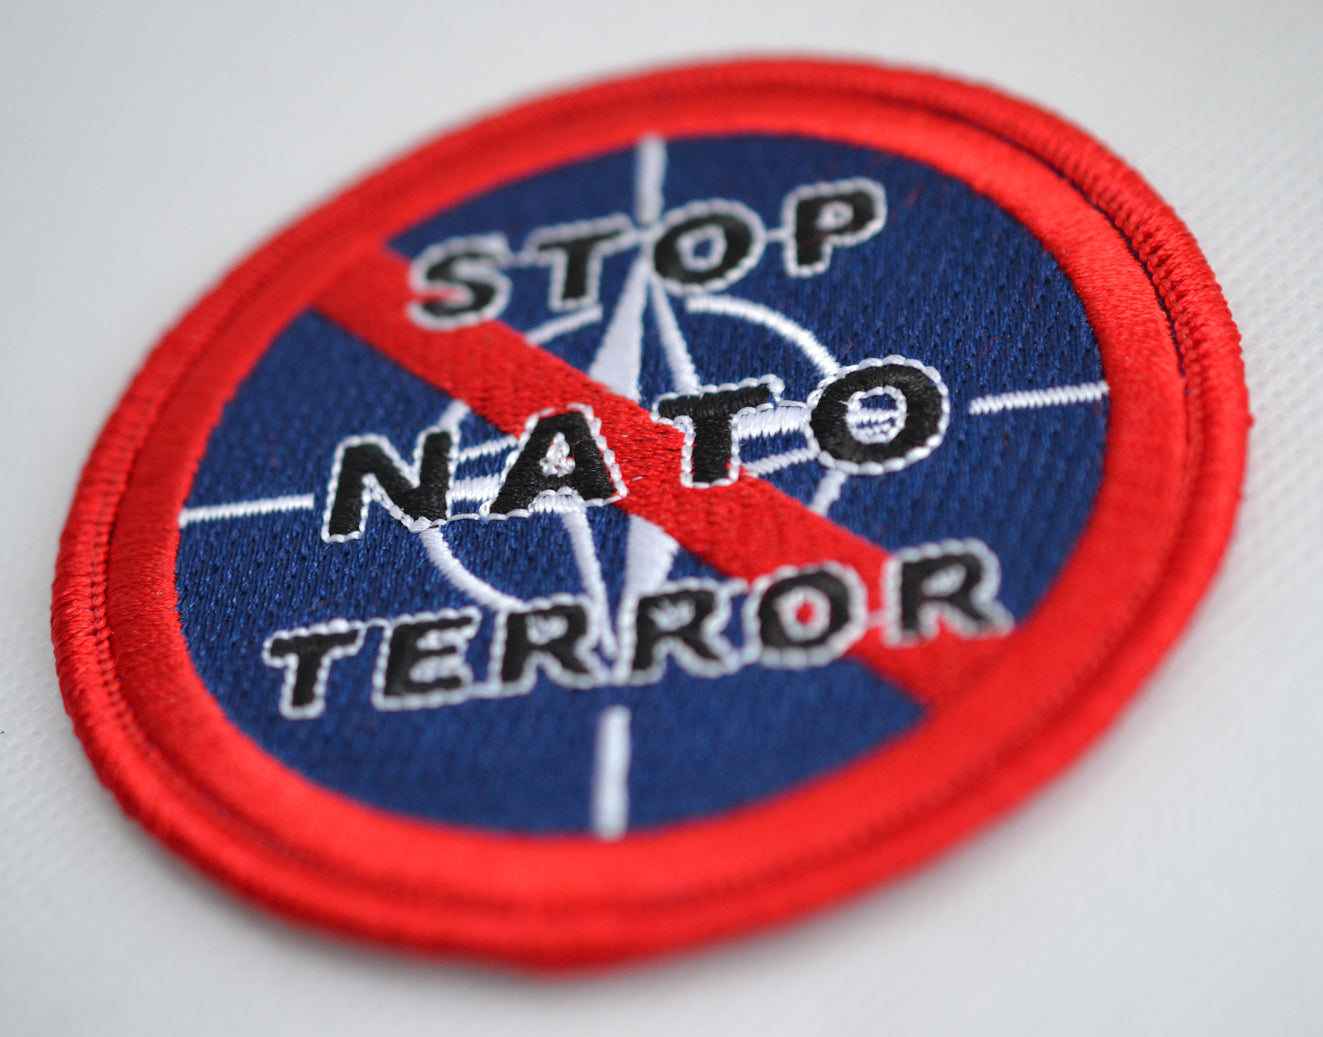 End NATO aggression and expansion!